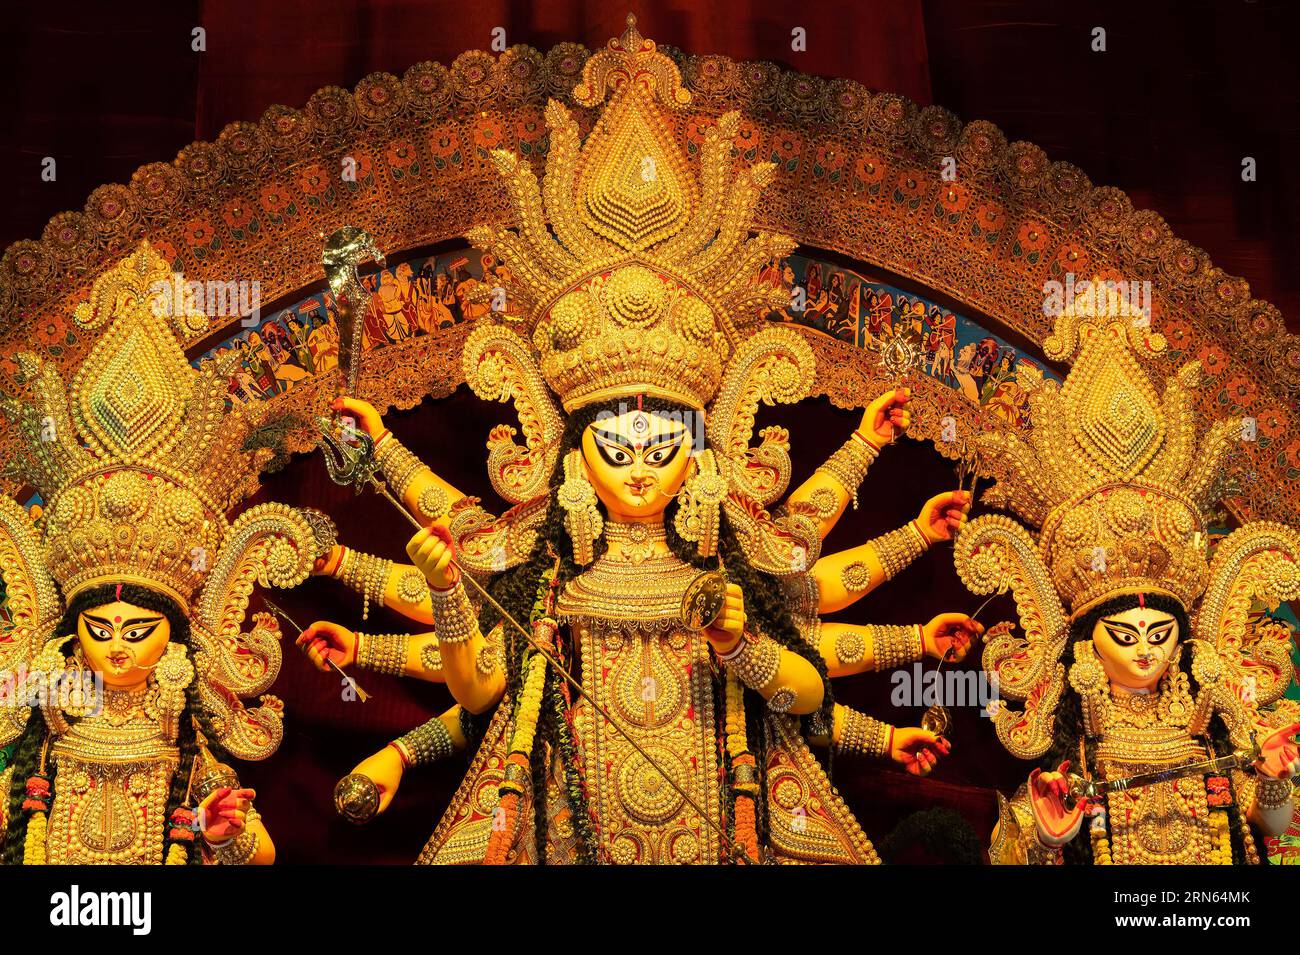 Howrah, West Bengal, India- 3rd October, 2022 : Beautiful idol of Goddess Durga, decorated with ornaments, being worshipped during Durga Puja festival Stock Photo